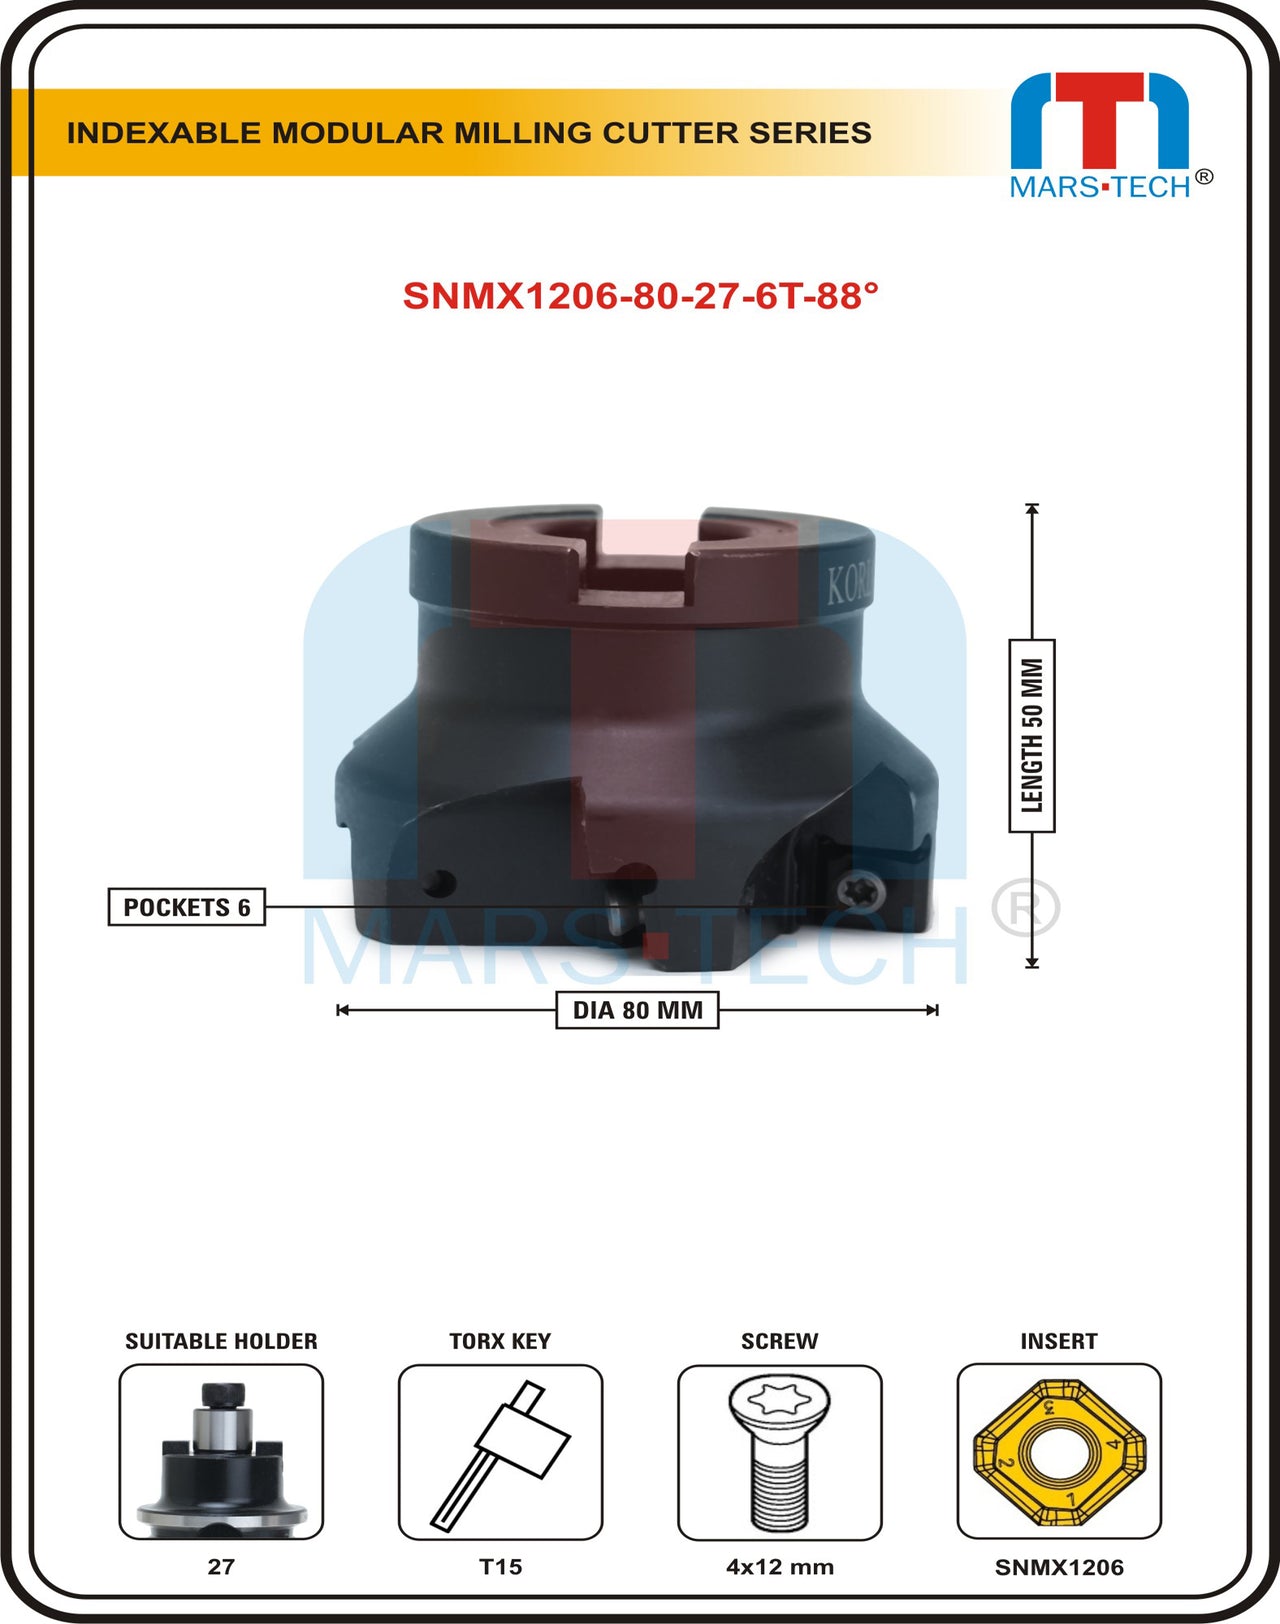 SNMX1206 Insert Facemill Dia 80